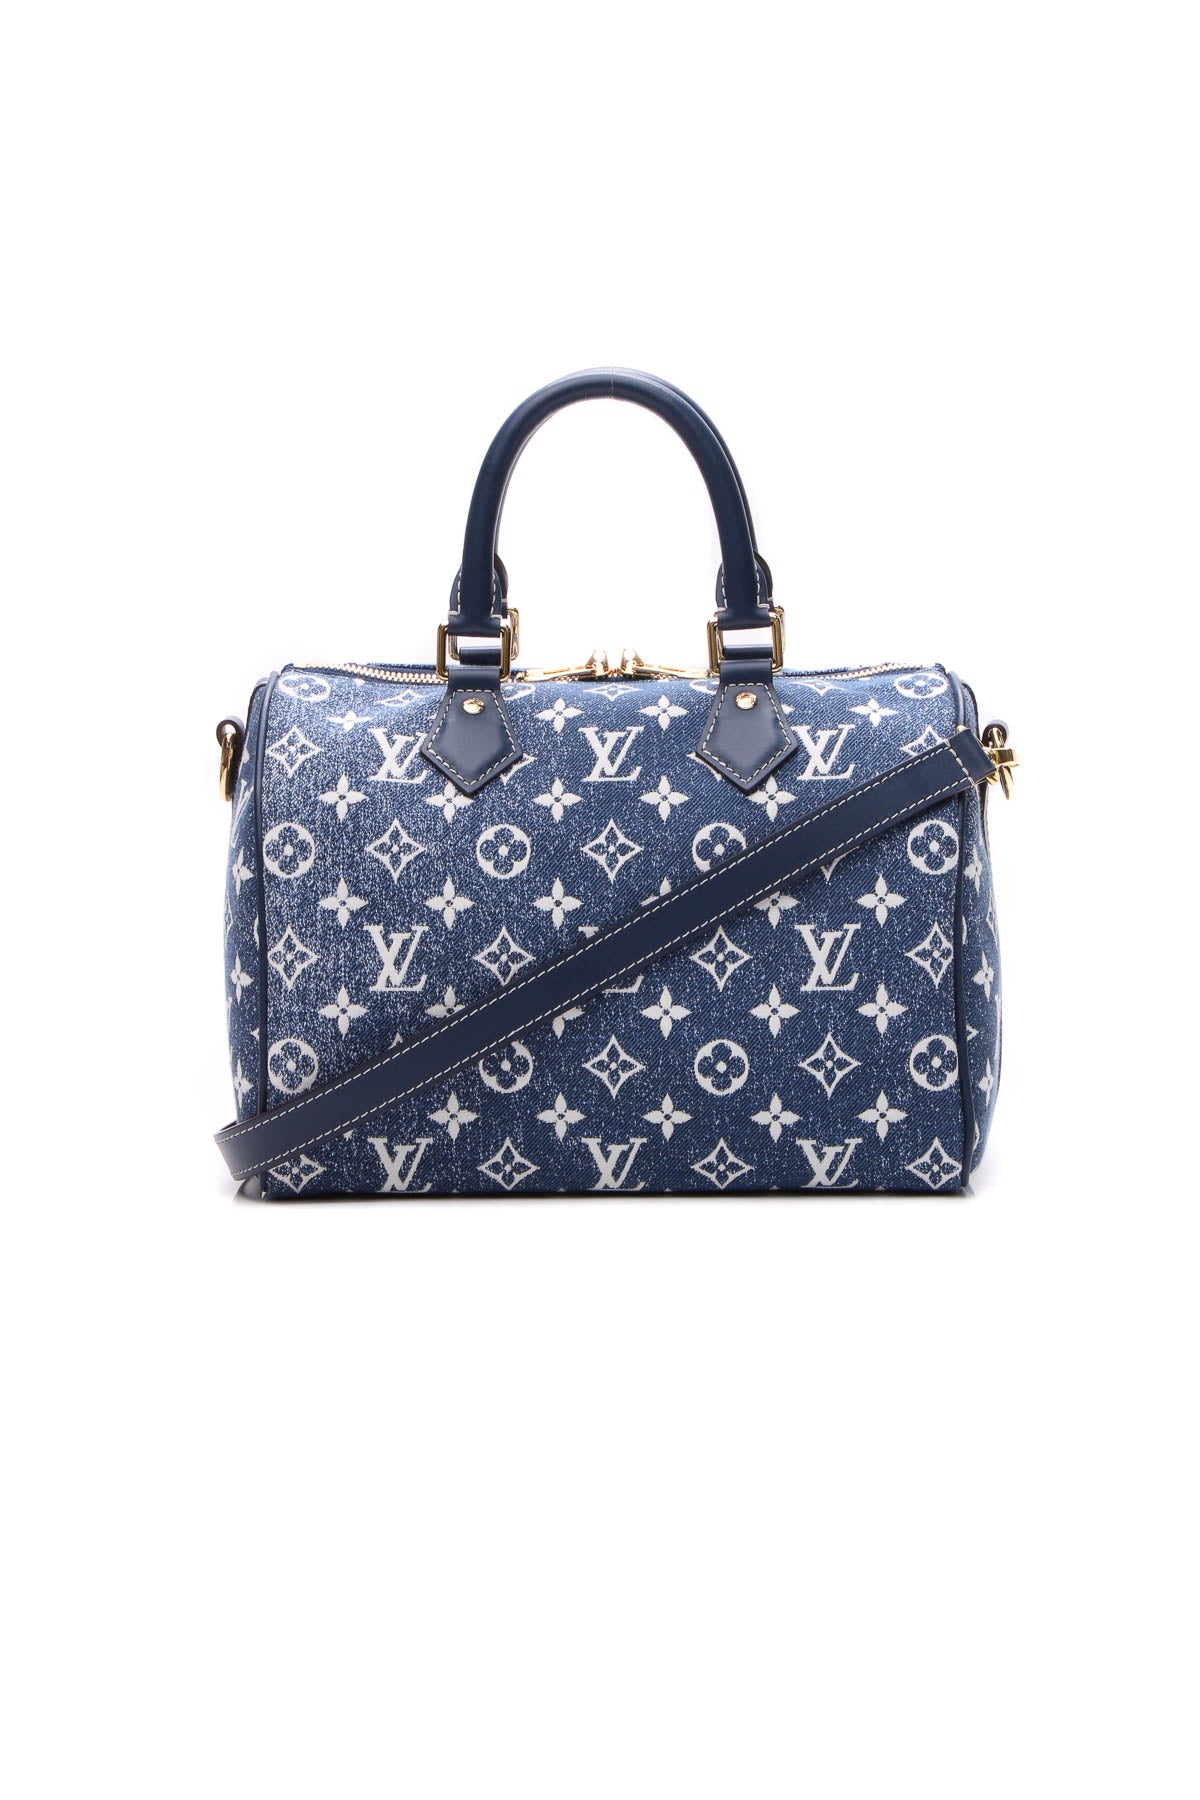 Louis Vuitton Speedy 30 Ramages and Speedy 25 bandouliere